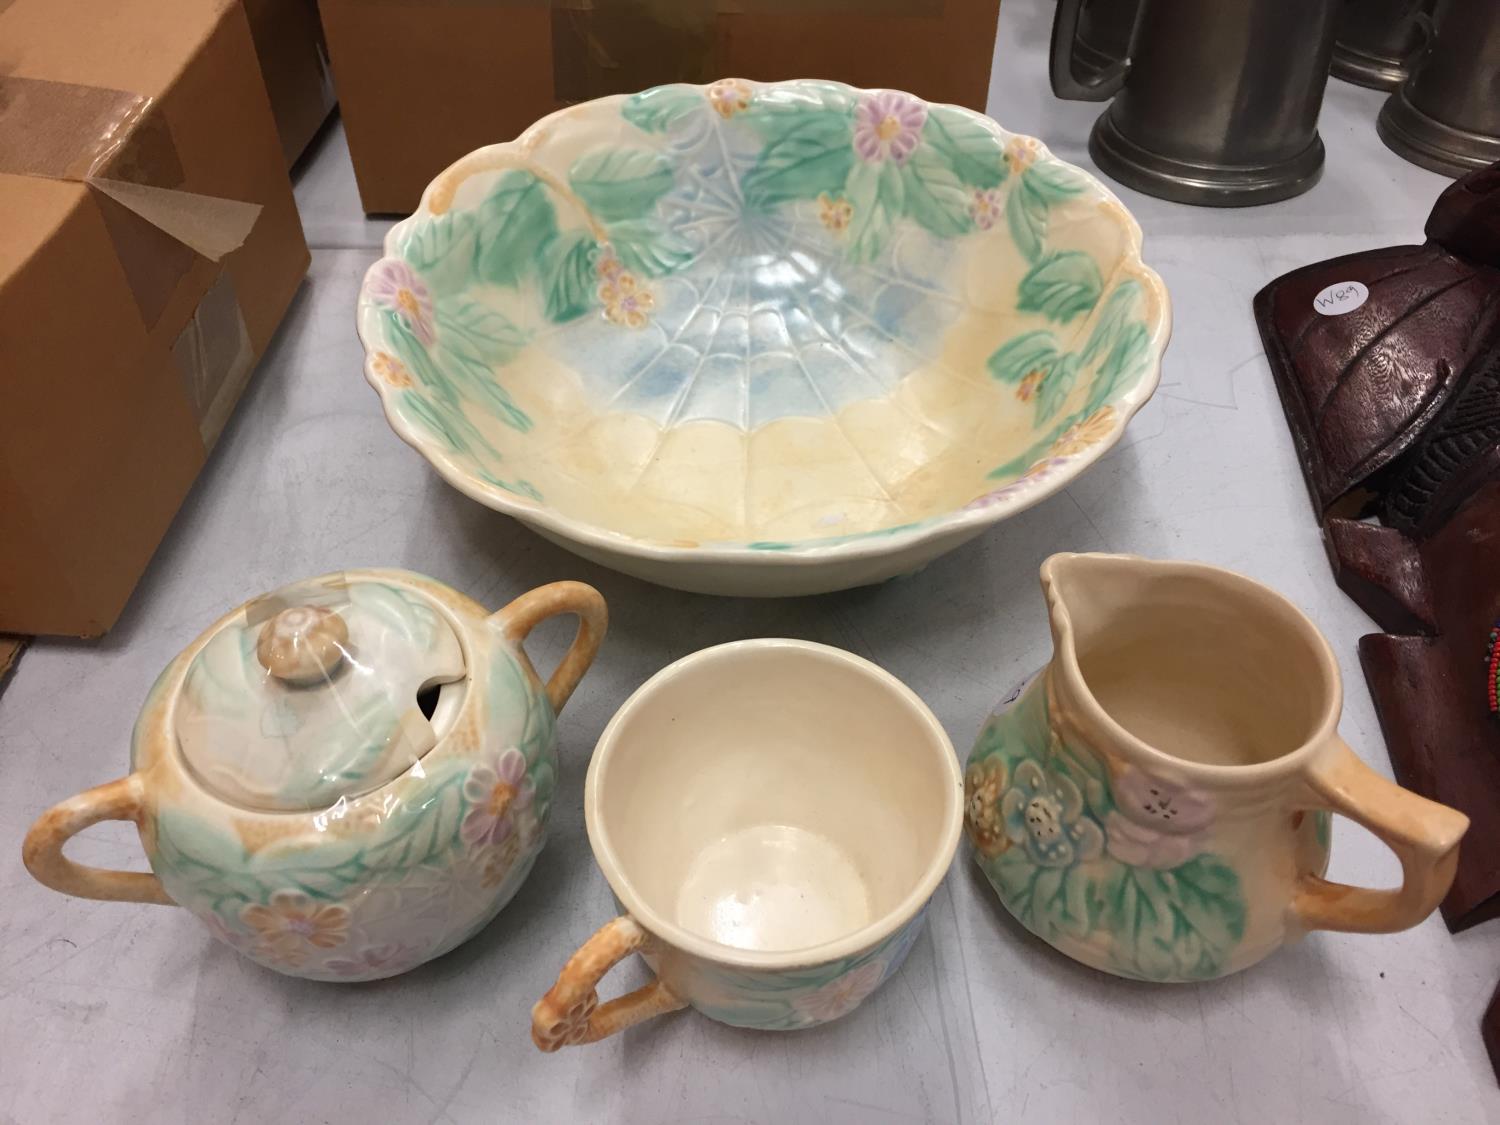 FOUR PIECES OF AVON WARE TO INCLUDE A JUG AND A FRUIT BOWL